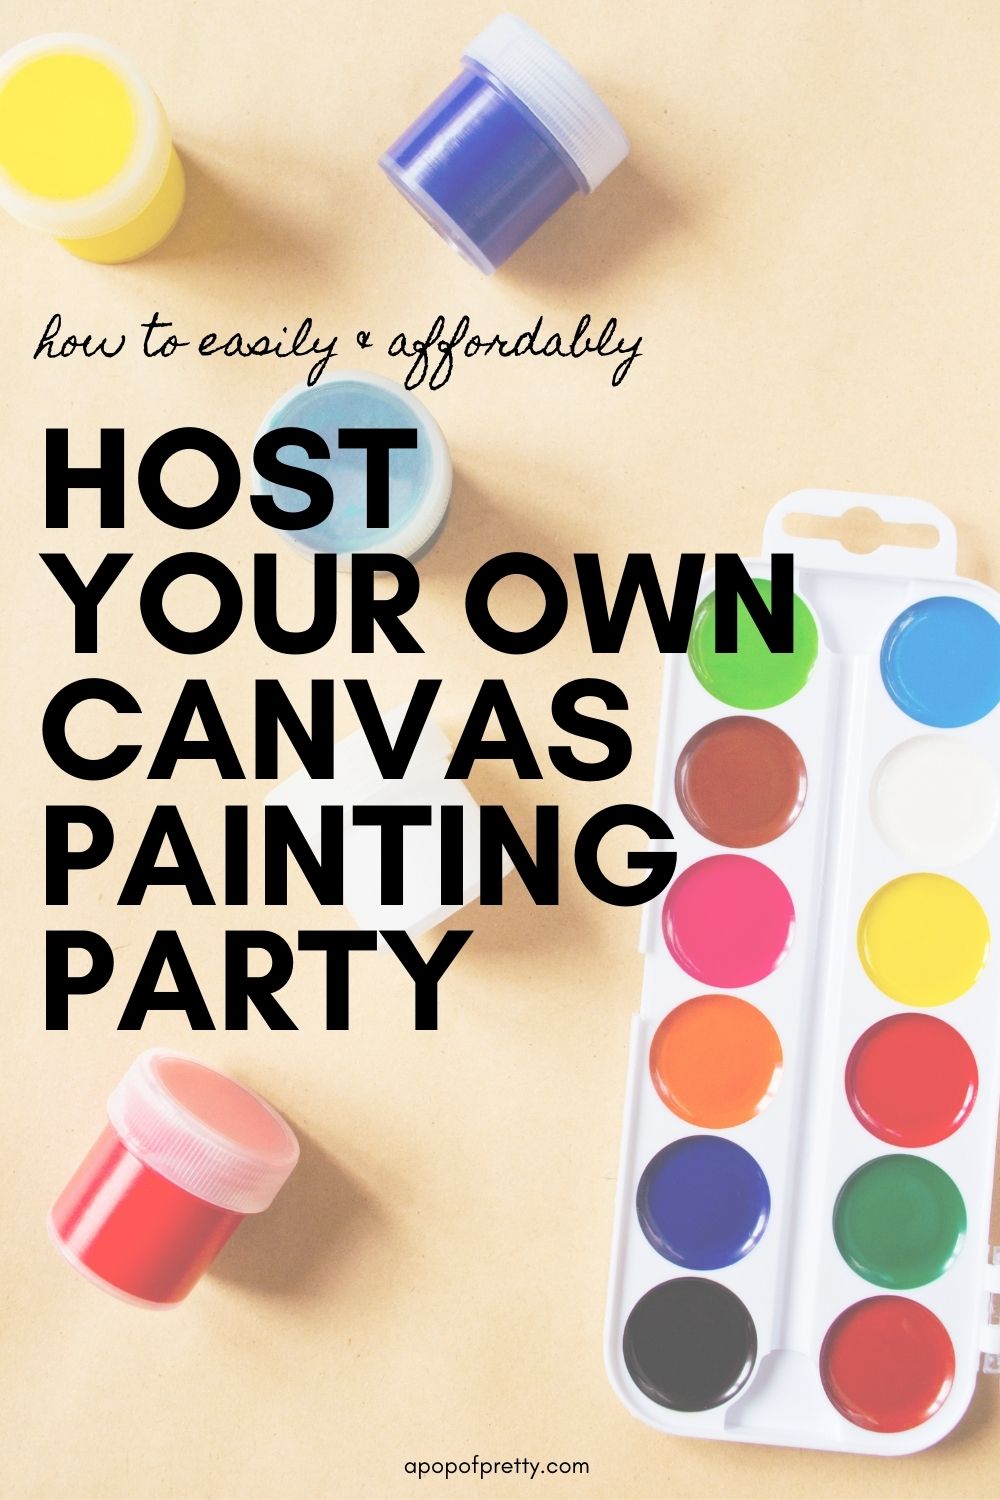 Paint and Sip: DIY Painting Party (with Dollar Store Finds) - A